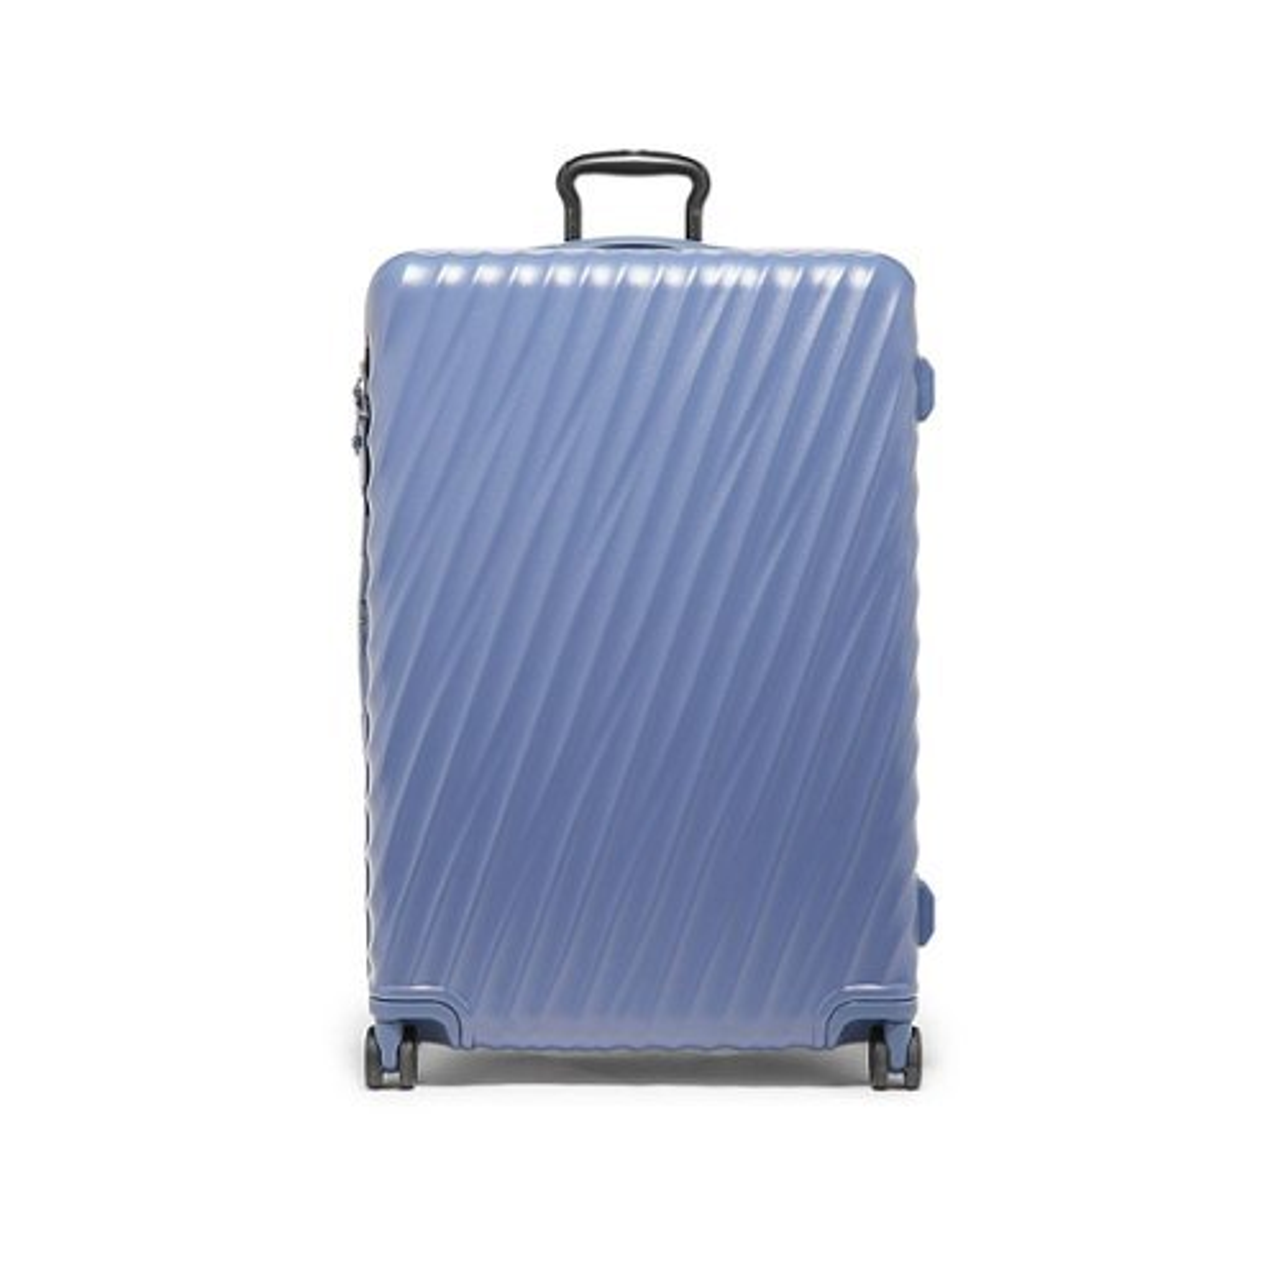 TUMI - 19 Degree Extended Trip Expandable 4 Wheeled Spinner Suitcase - Blue Texture